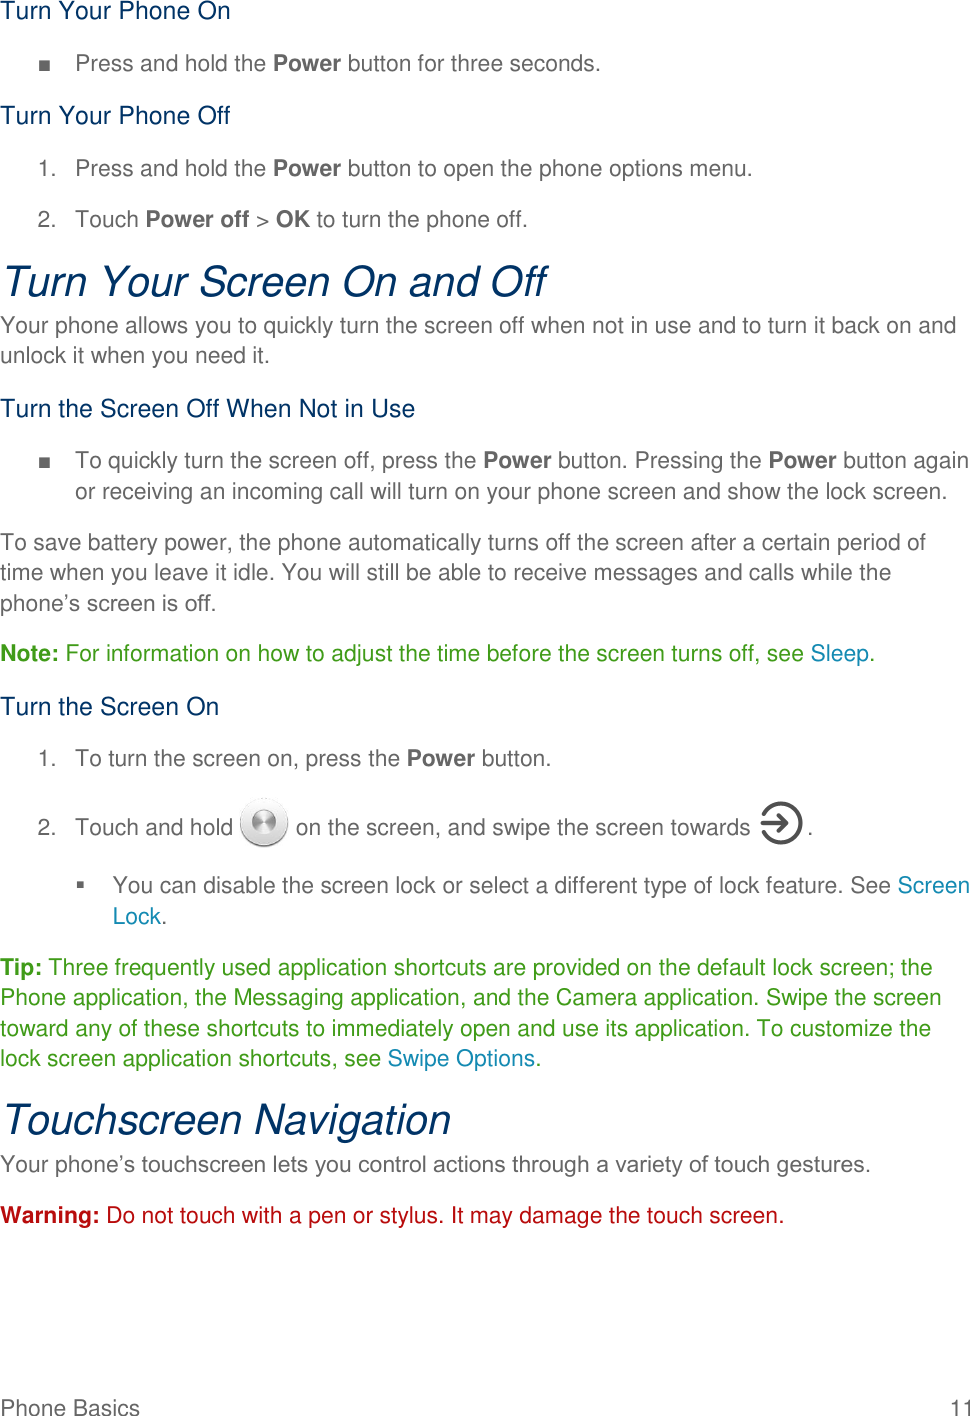 Phone Basics  11 Turn Your Phone On ■  Press and hold the Power button for three seconds. Turn Your Phone Off 1.  Press and hold the Power button to open the phone options menu.  2.  Touch Power off &gt; OK to turn the phone off. Turn Your Screen On and Off Your phone allows you to quickly turn the screen off when not in use and to turn it back on and unlock it when you need it. Turn the Screen Off When Not in Use ■  To quickly turn the screen off, press the Power button. Pressing the Power button again or receiving an incoming call will turn on your phone screen and show the lock screen. To save battery power, the phone automatically turns off the screen after a certain period of time when you leave it idle. You will still be able to receive messages and calls while the phone’s screen is off. Note: For information on how to adjust the time before the screen turns off, see Sleep.  Turn the Screen On 1.  To turn the screen on, press the Power button. 2.  Touch and hold   on the screen, and swipe the screen towards  .   You can disable the screen lock or select a different type of lock feature. See Screen Lock. Tip: Three frequently used application shortcuts are provided on the default lock screen; the Phone application, the Messaging application, and the Camera application. Swipe the screen toward any of these shortcuts to immediately open and use its application. To customize the lock screen application shortcuts, see Swipe Options. Touchscreen Navigation Your phone’s touchscreen lets you control actions through a variety of touch gestures. Warning: Do not touch with a pen or stylus. It may damage the touch screen. 